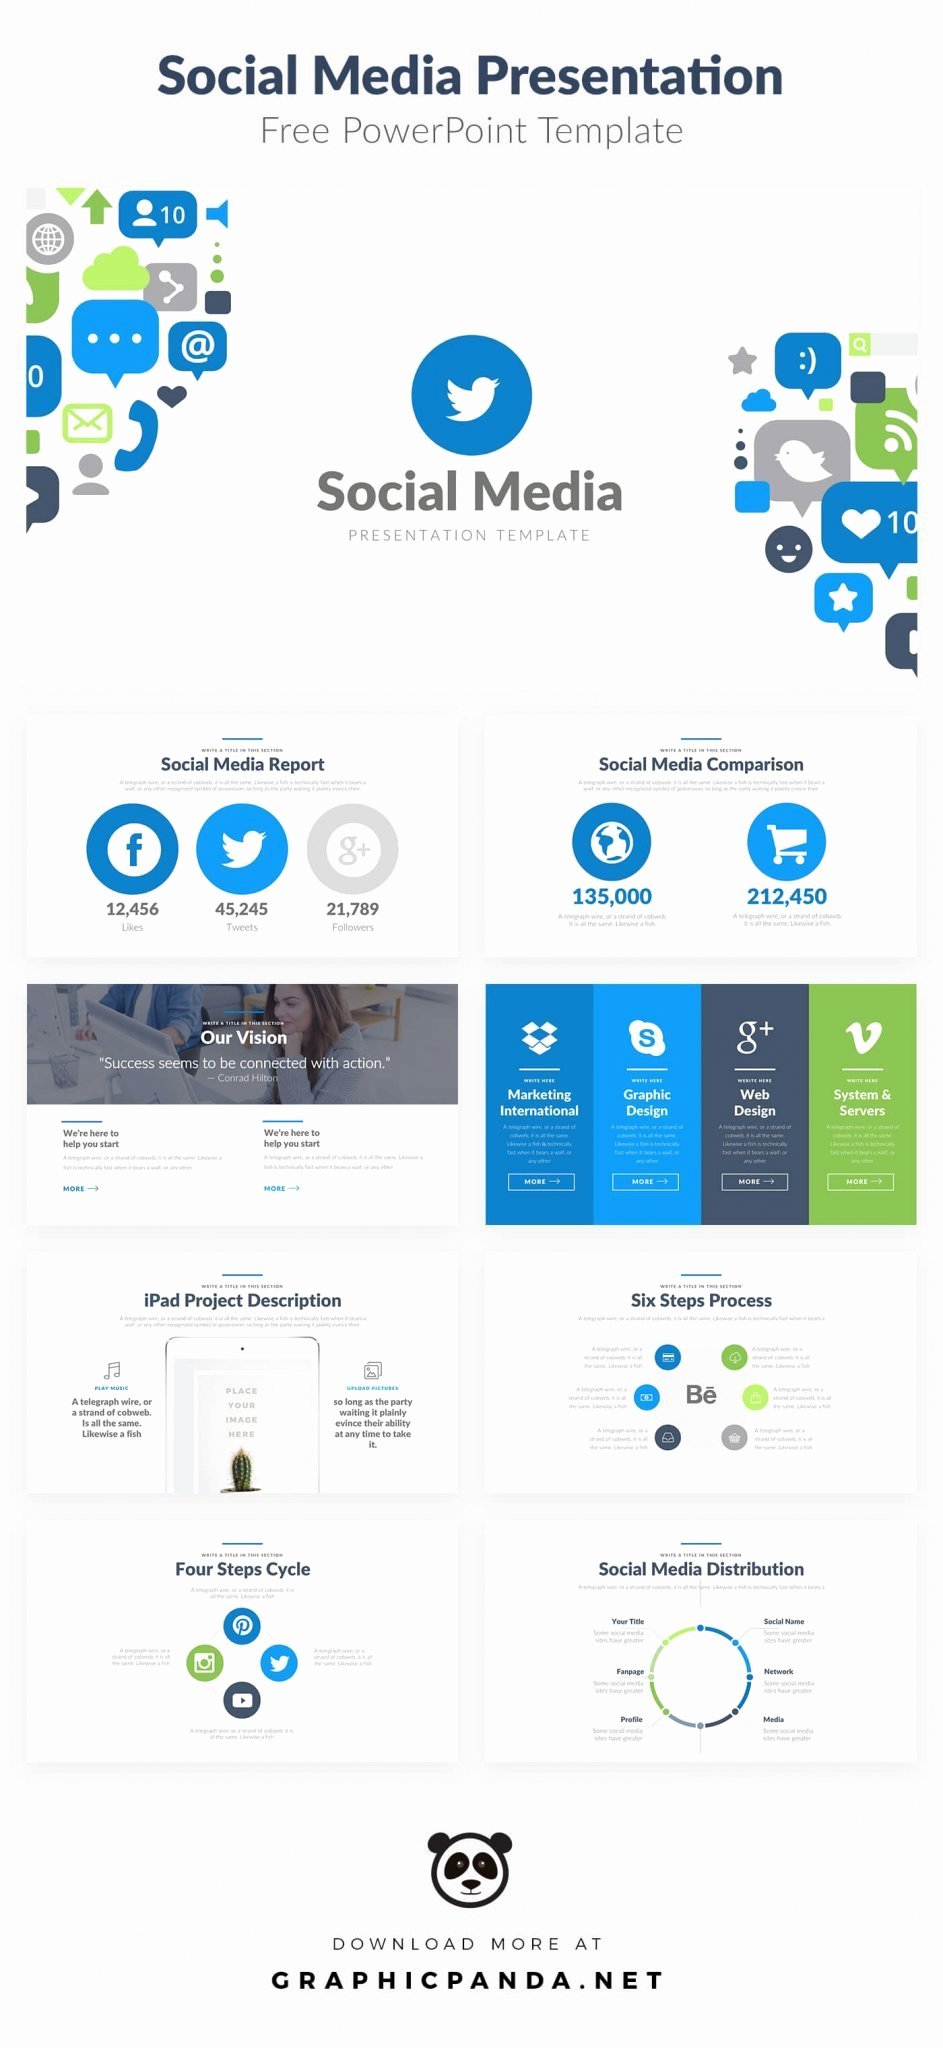 Social Media Ppt Template Beautiful 10 Free social Media Slides Templates for Microsoft Powerpoint